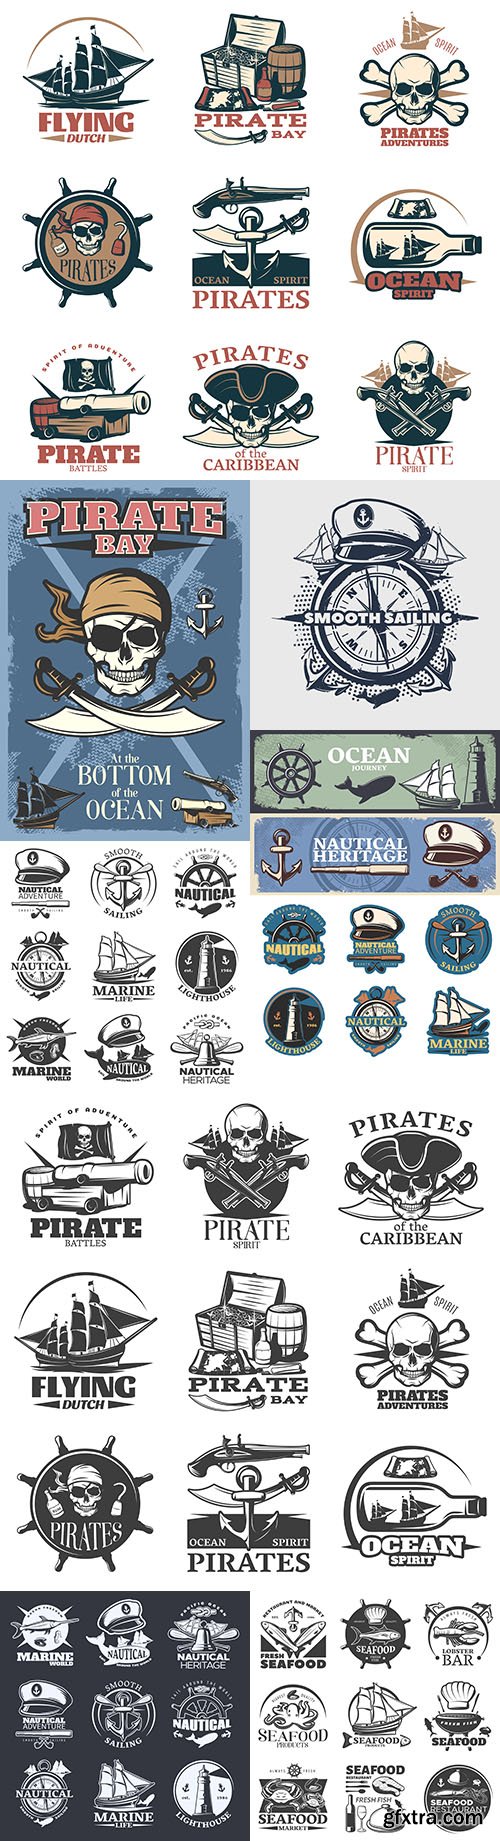 Vintage antique emblems and logos with text design 11 » GFxtra